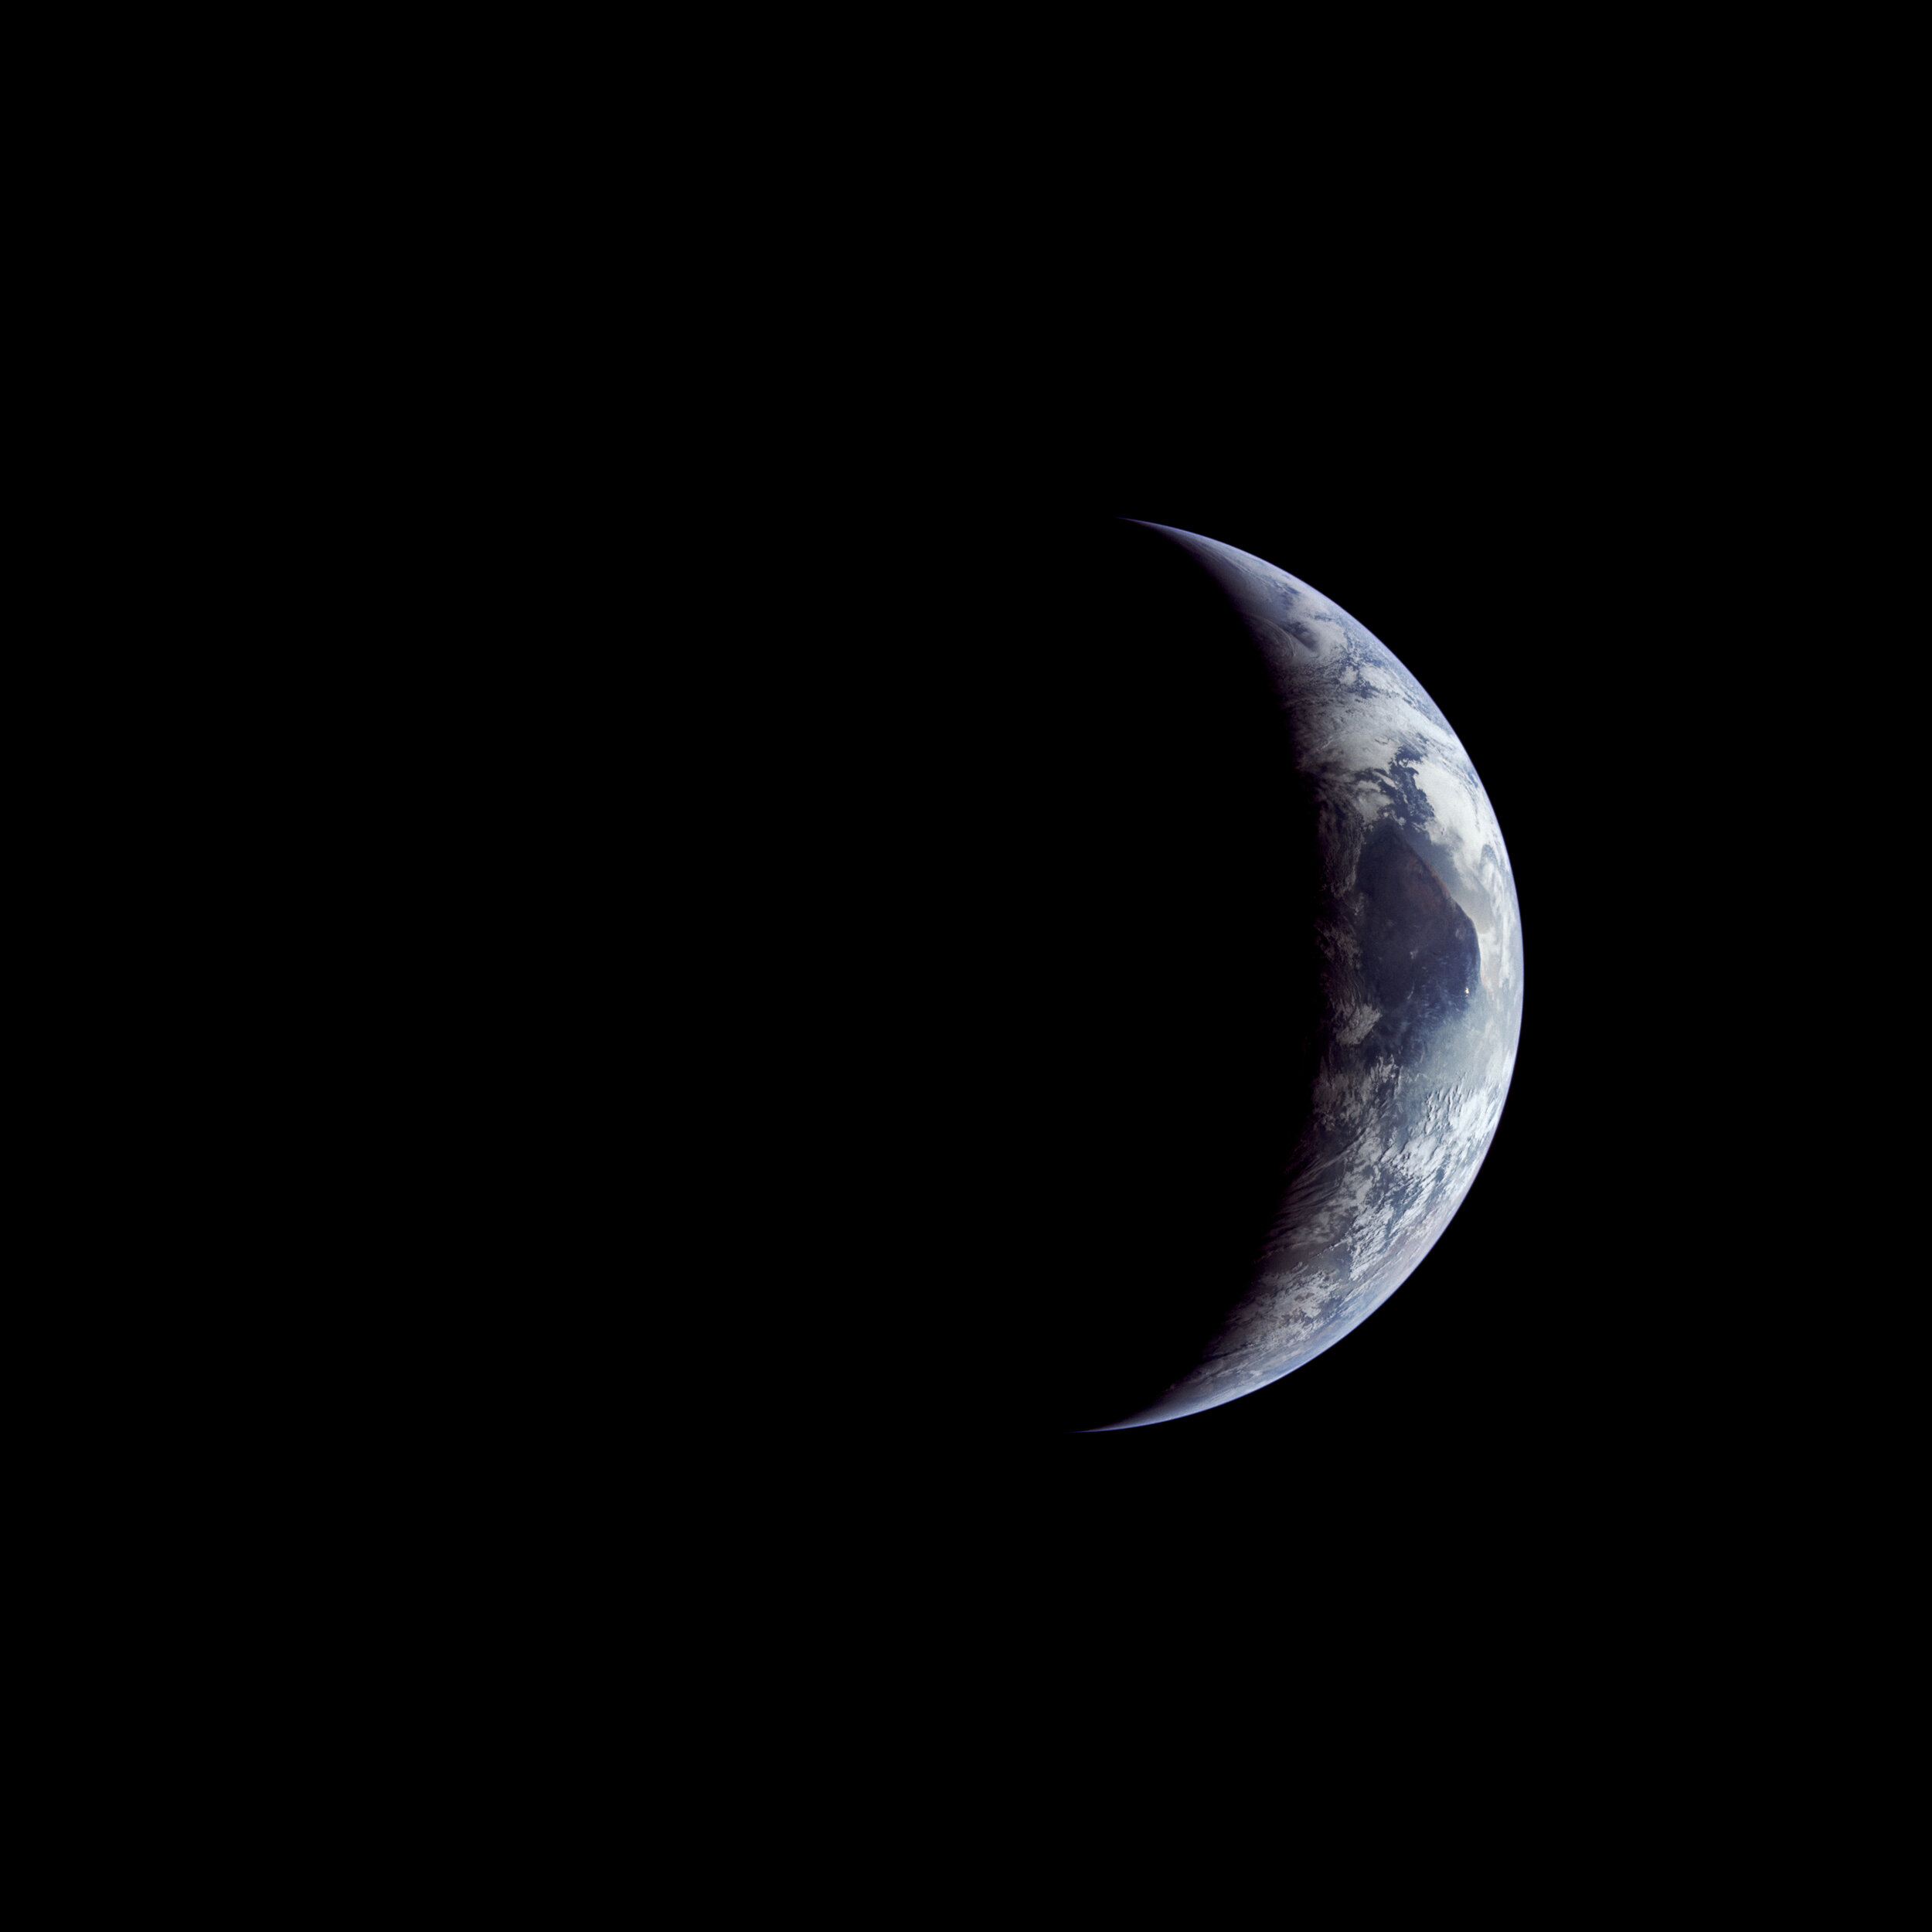  Apollo 11  A beautiful crescent Earth. Taken by the Apollo 11 crew on their way home. In this image, North is down. Near the centre is the southern tip of Africa, pointing upwards. Sunlight glints off wetlands and rivers.   ‘Oddly enough the overrid